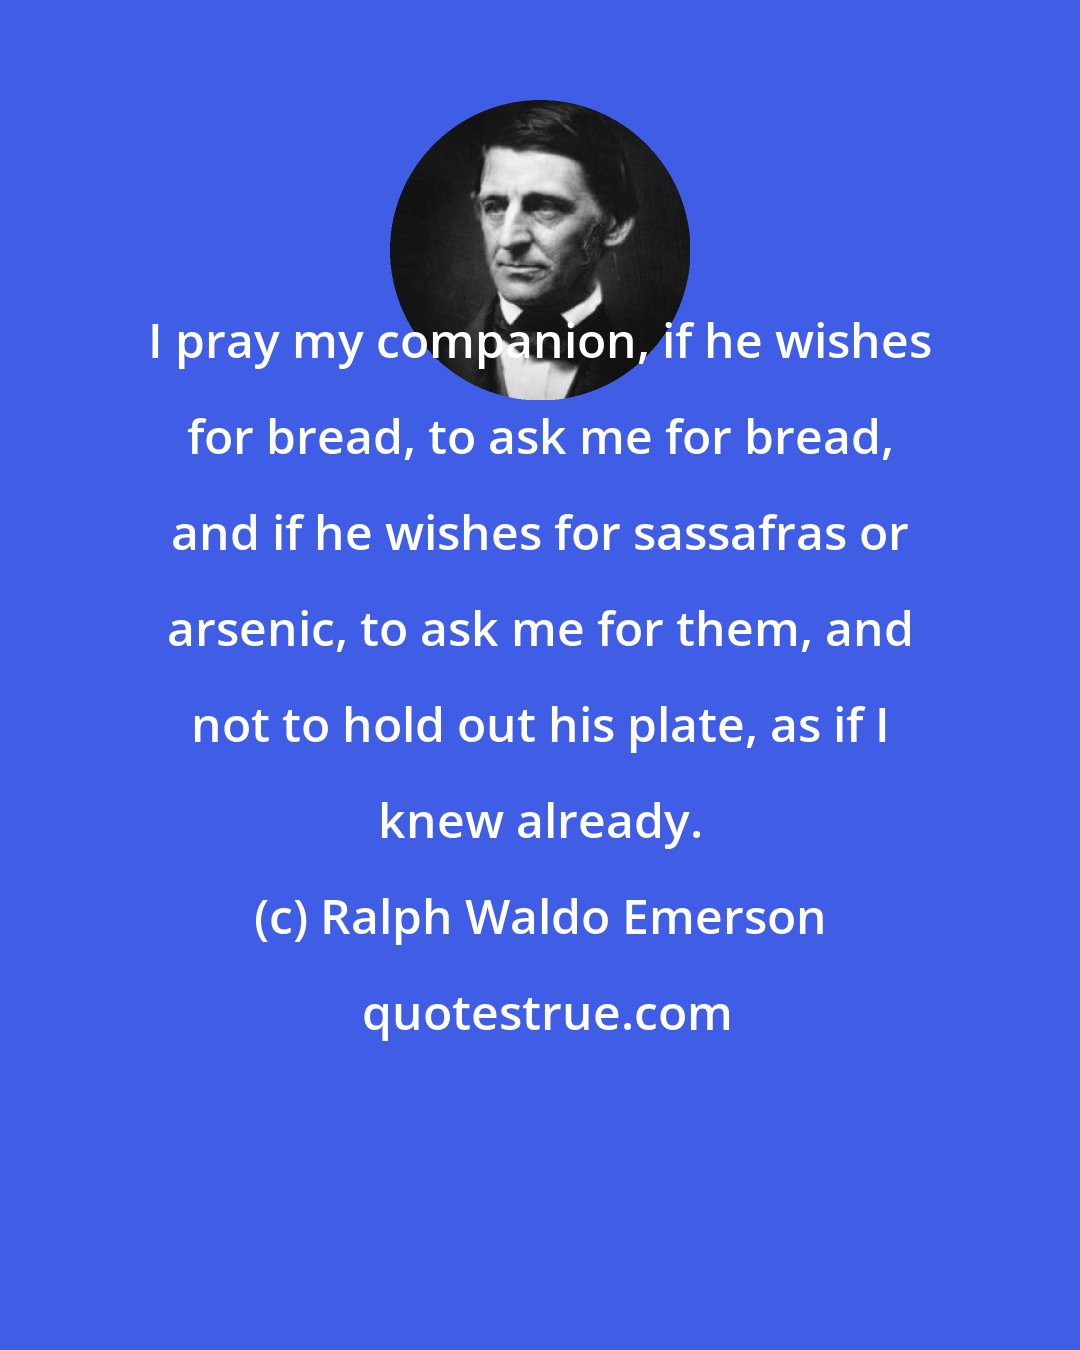 Ralph Waldo Emerson: I pray my companion, if he wishes for bread, to ask me for bread, and if he wishes for sassafras or arsenic, to ask me for them, and not to hold out his plate, as if I knew already.